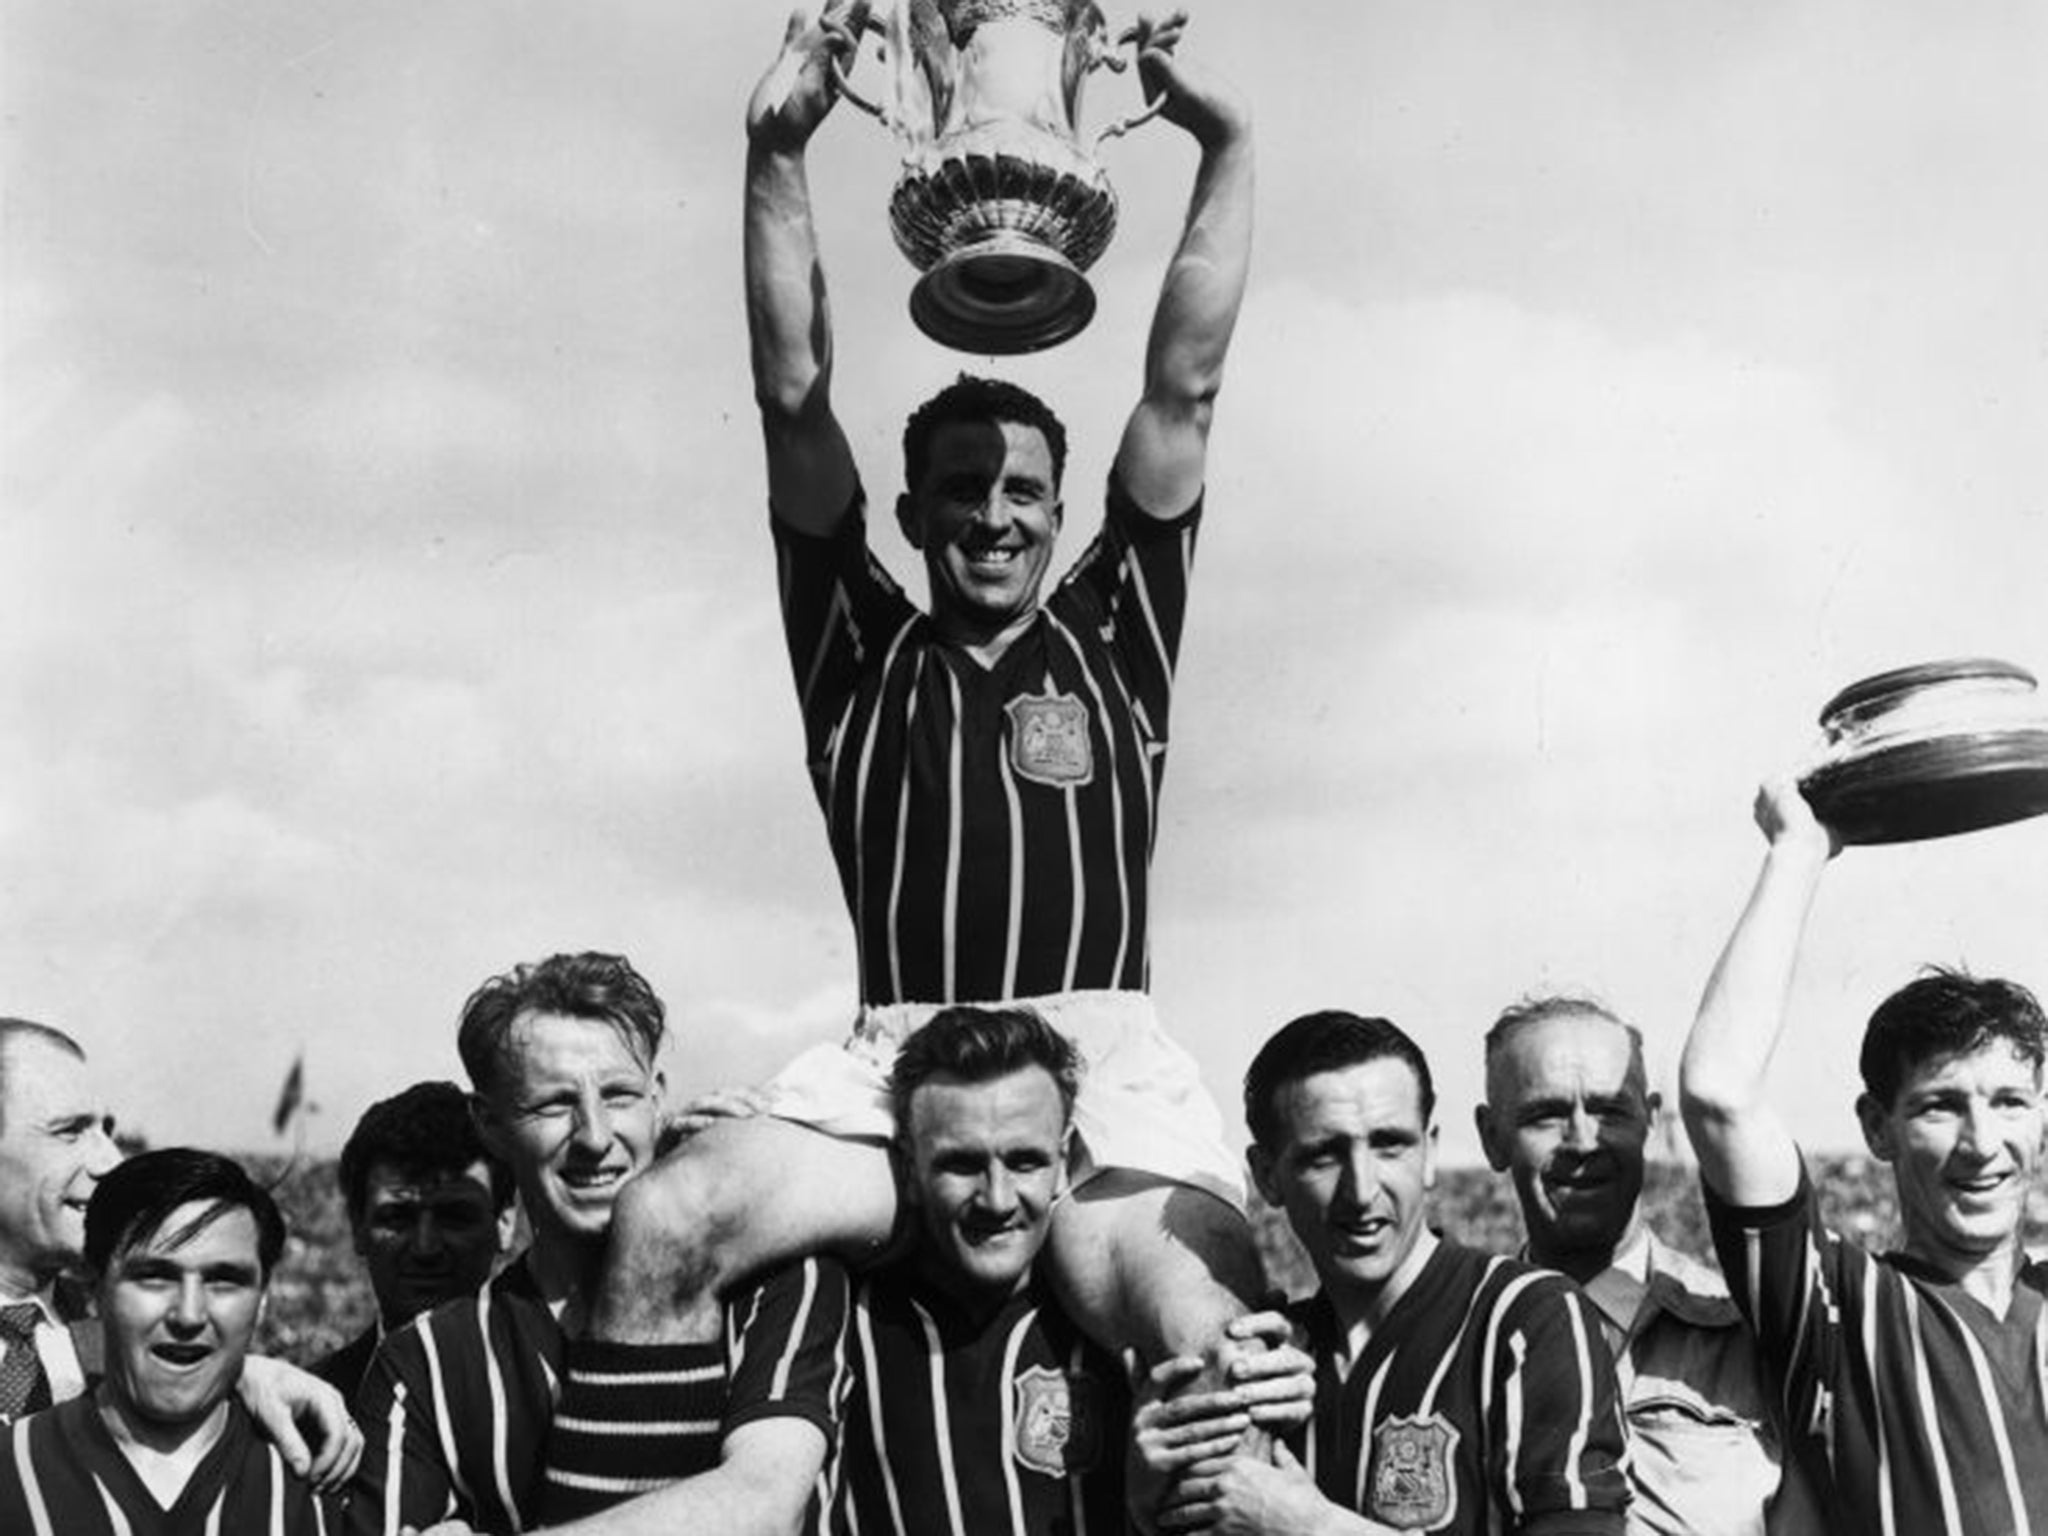 Little, far right, at Wembley following the 1957 Cup final win against Birmingham City